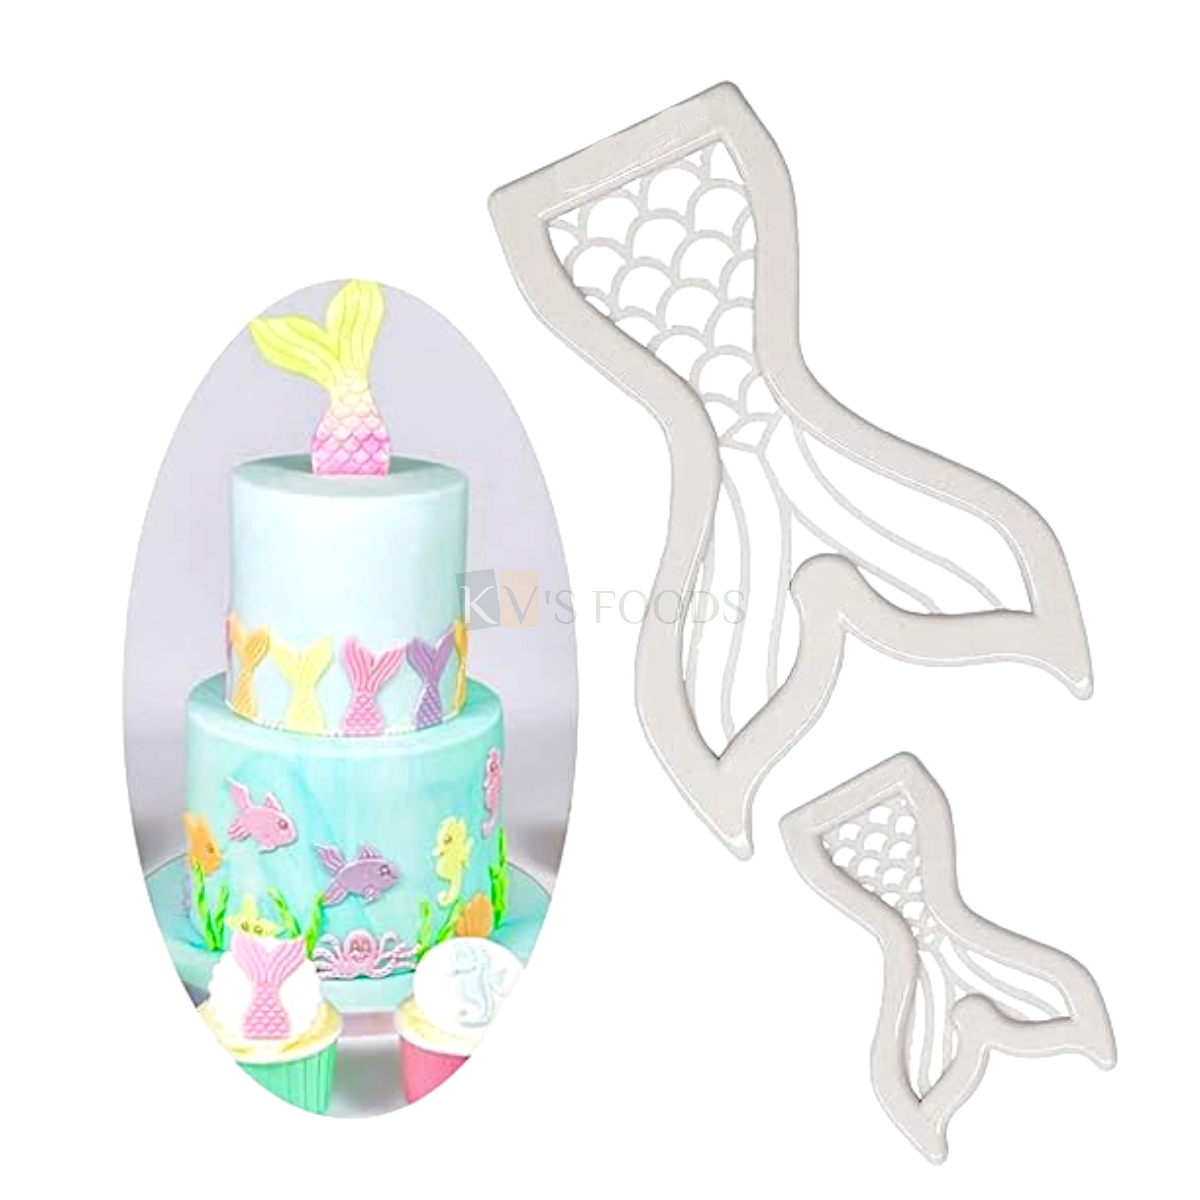 2 PCS White Little Mermaid Tail Shapes Fondant Plunger Cutters, Embossing Mold Presses Impressions Sealife Underwater Theme Kids Girls Birthday Baby shower Theme Chocolate Pancake DIY Cake Decorations